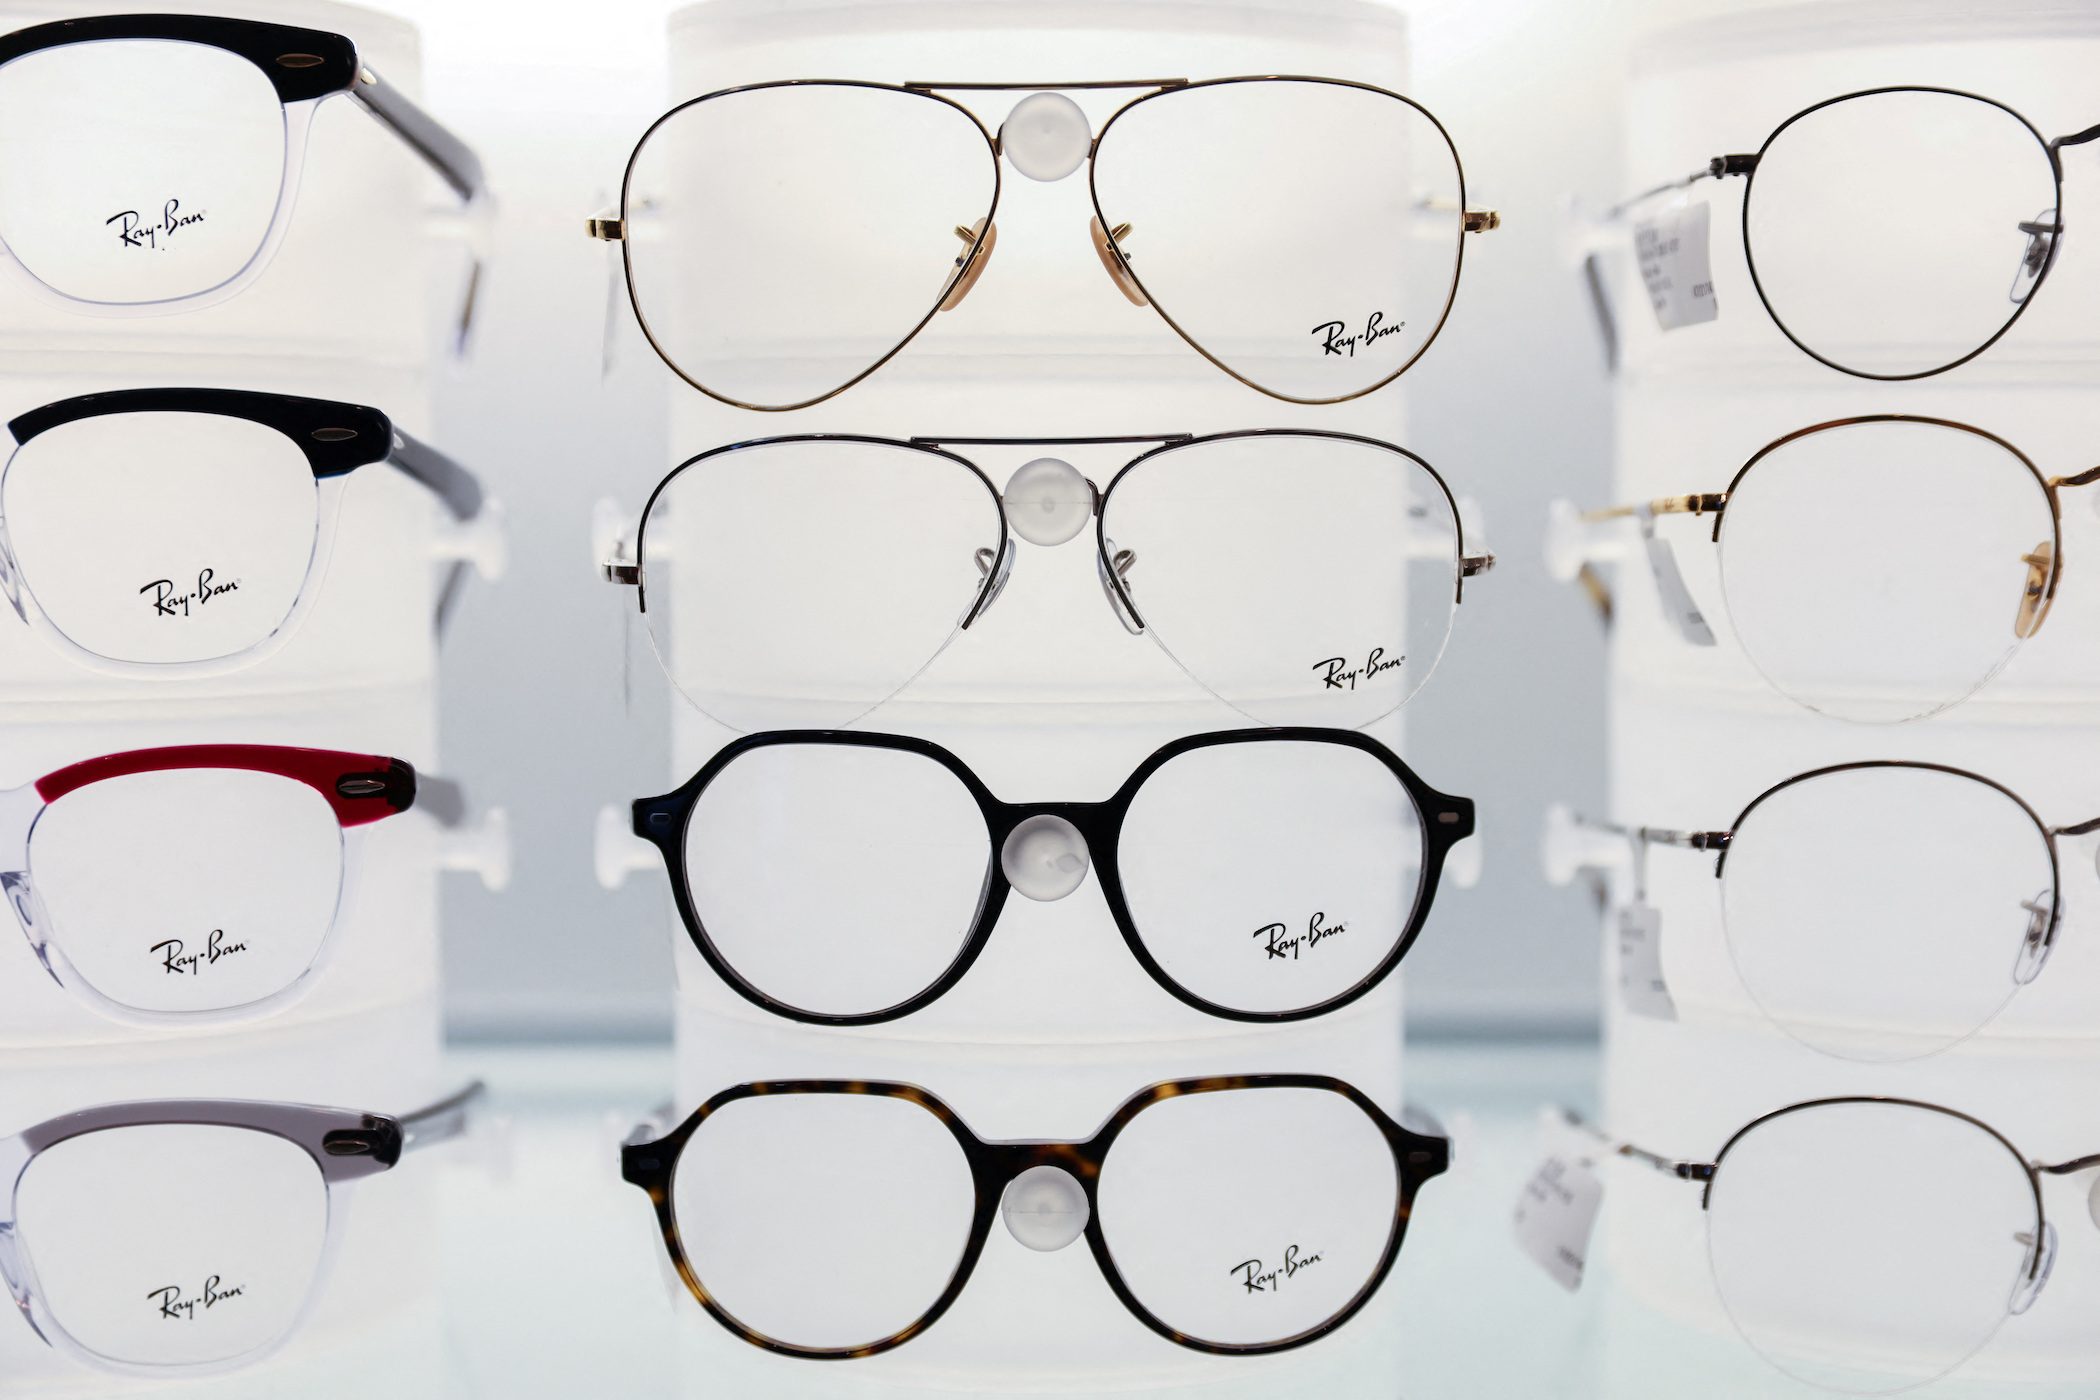 Del Vecchio rose from poverty to billions by adding style to spectacles